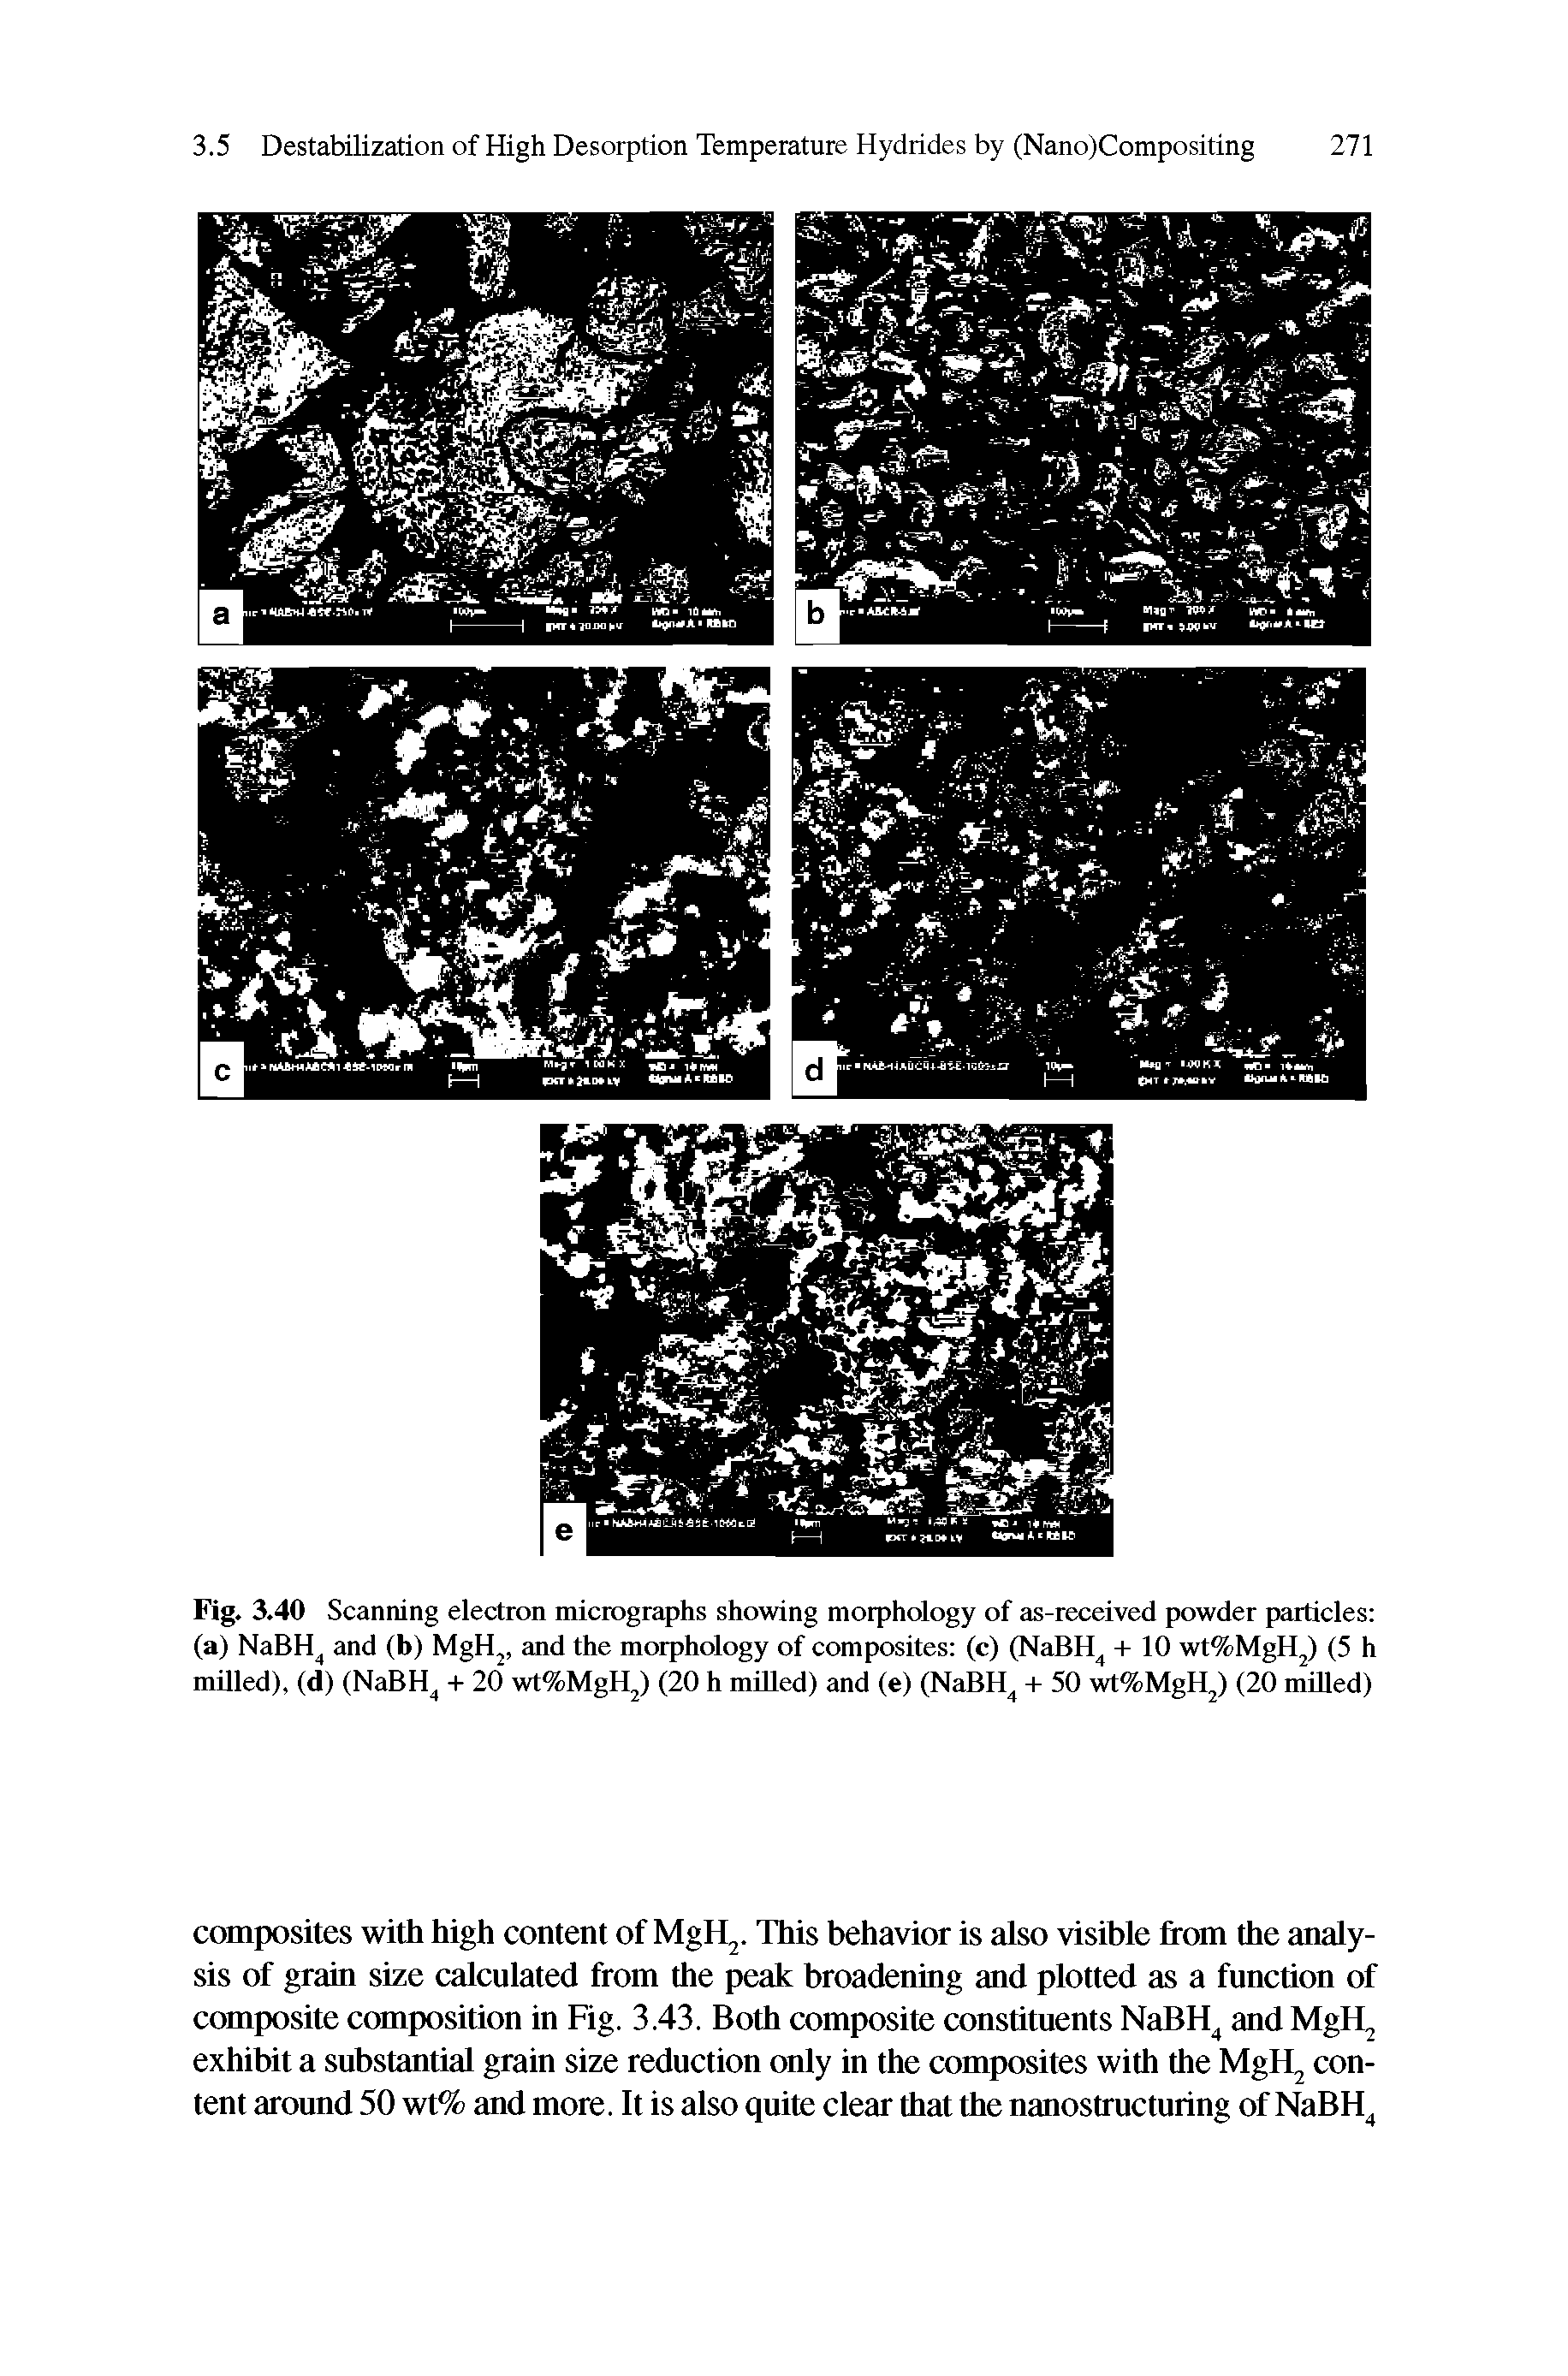 Fig. 3.40 Scanning electron micrographs showing morphology of as-received powder particles (a) NaBH and (b) MgH, and the morphology of composites (c) (NaBH + 10 wt%MgH ) (5 h milled), (d) (NaBH + 20 wt%MgH2) (20 h milled) and (e) (NaBH + 50 wt%MgH2) (20 milled)...